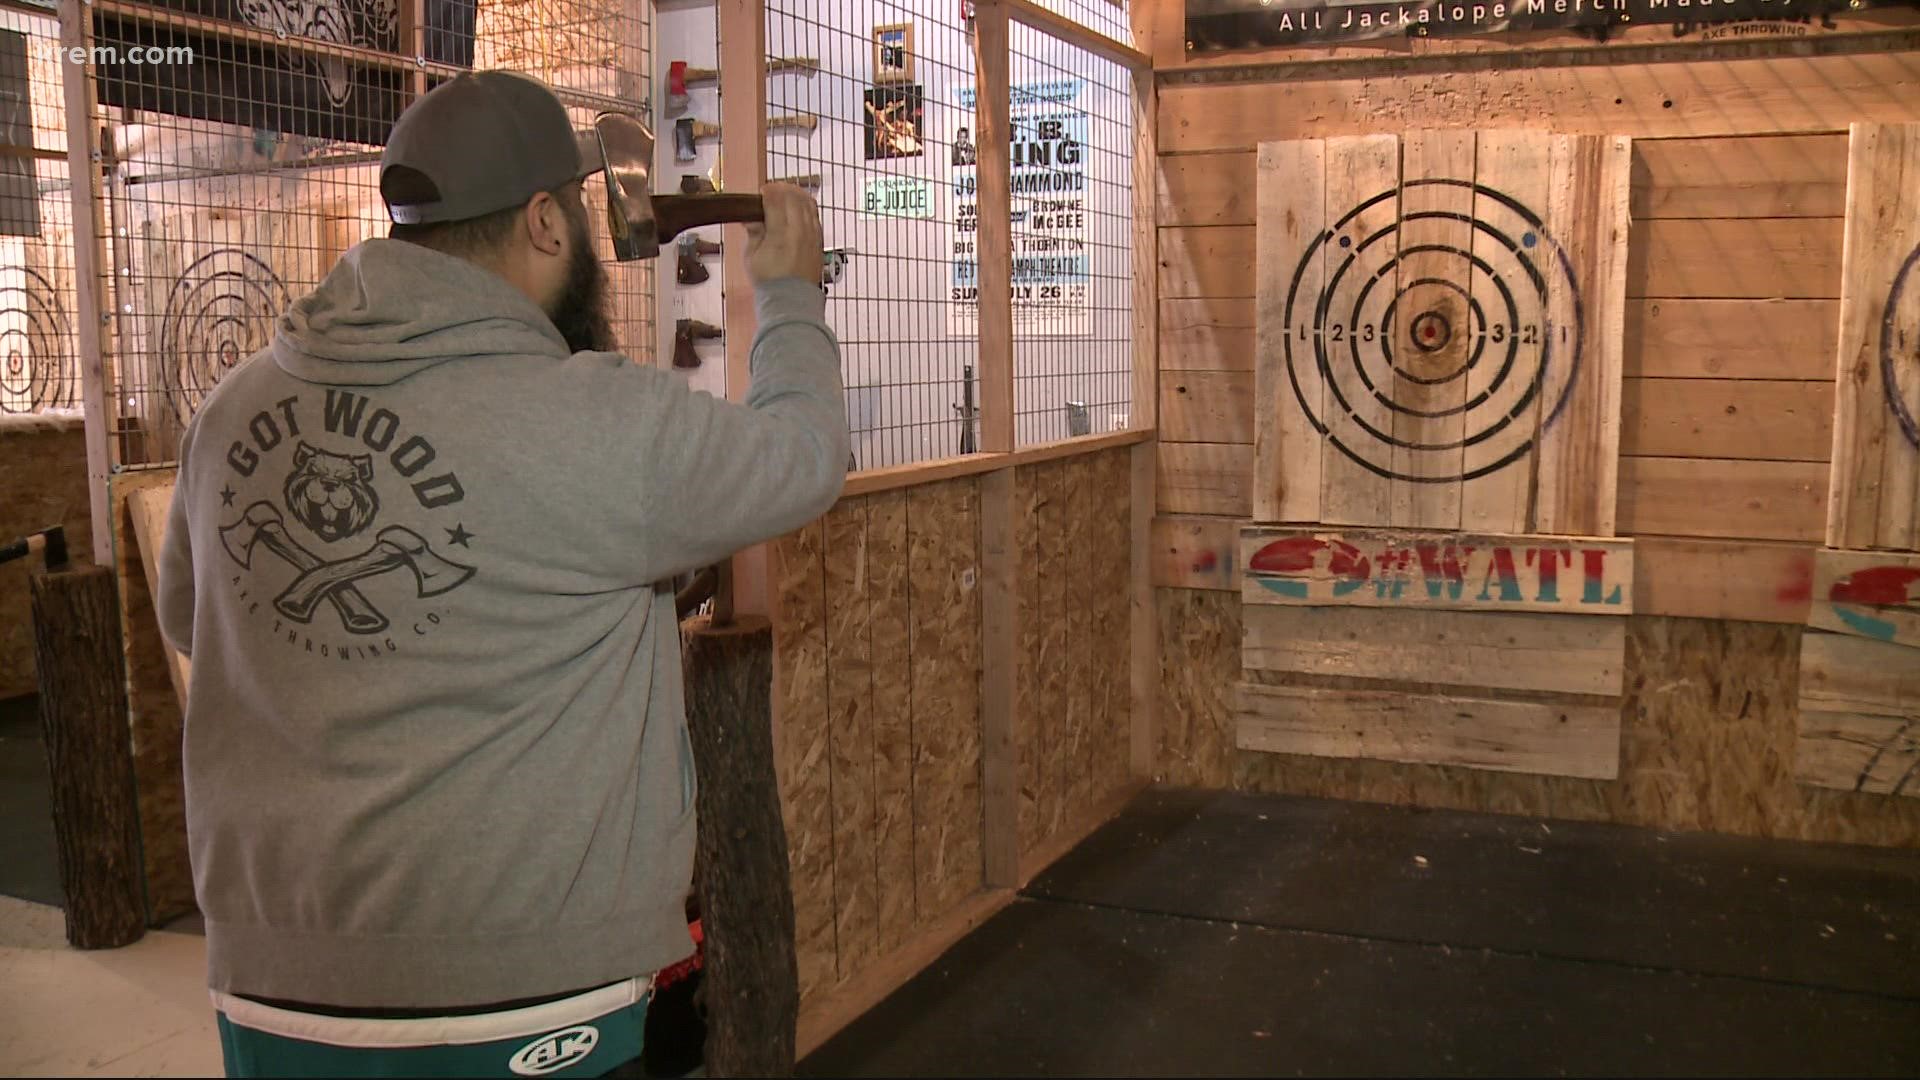 Spokane axe throwing business, Jumping Jackalope, is growing despite challenges from nearby construction. | Boomtown